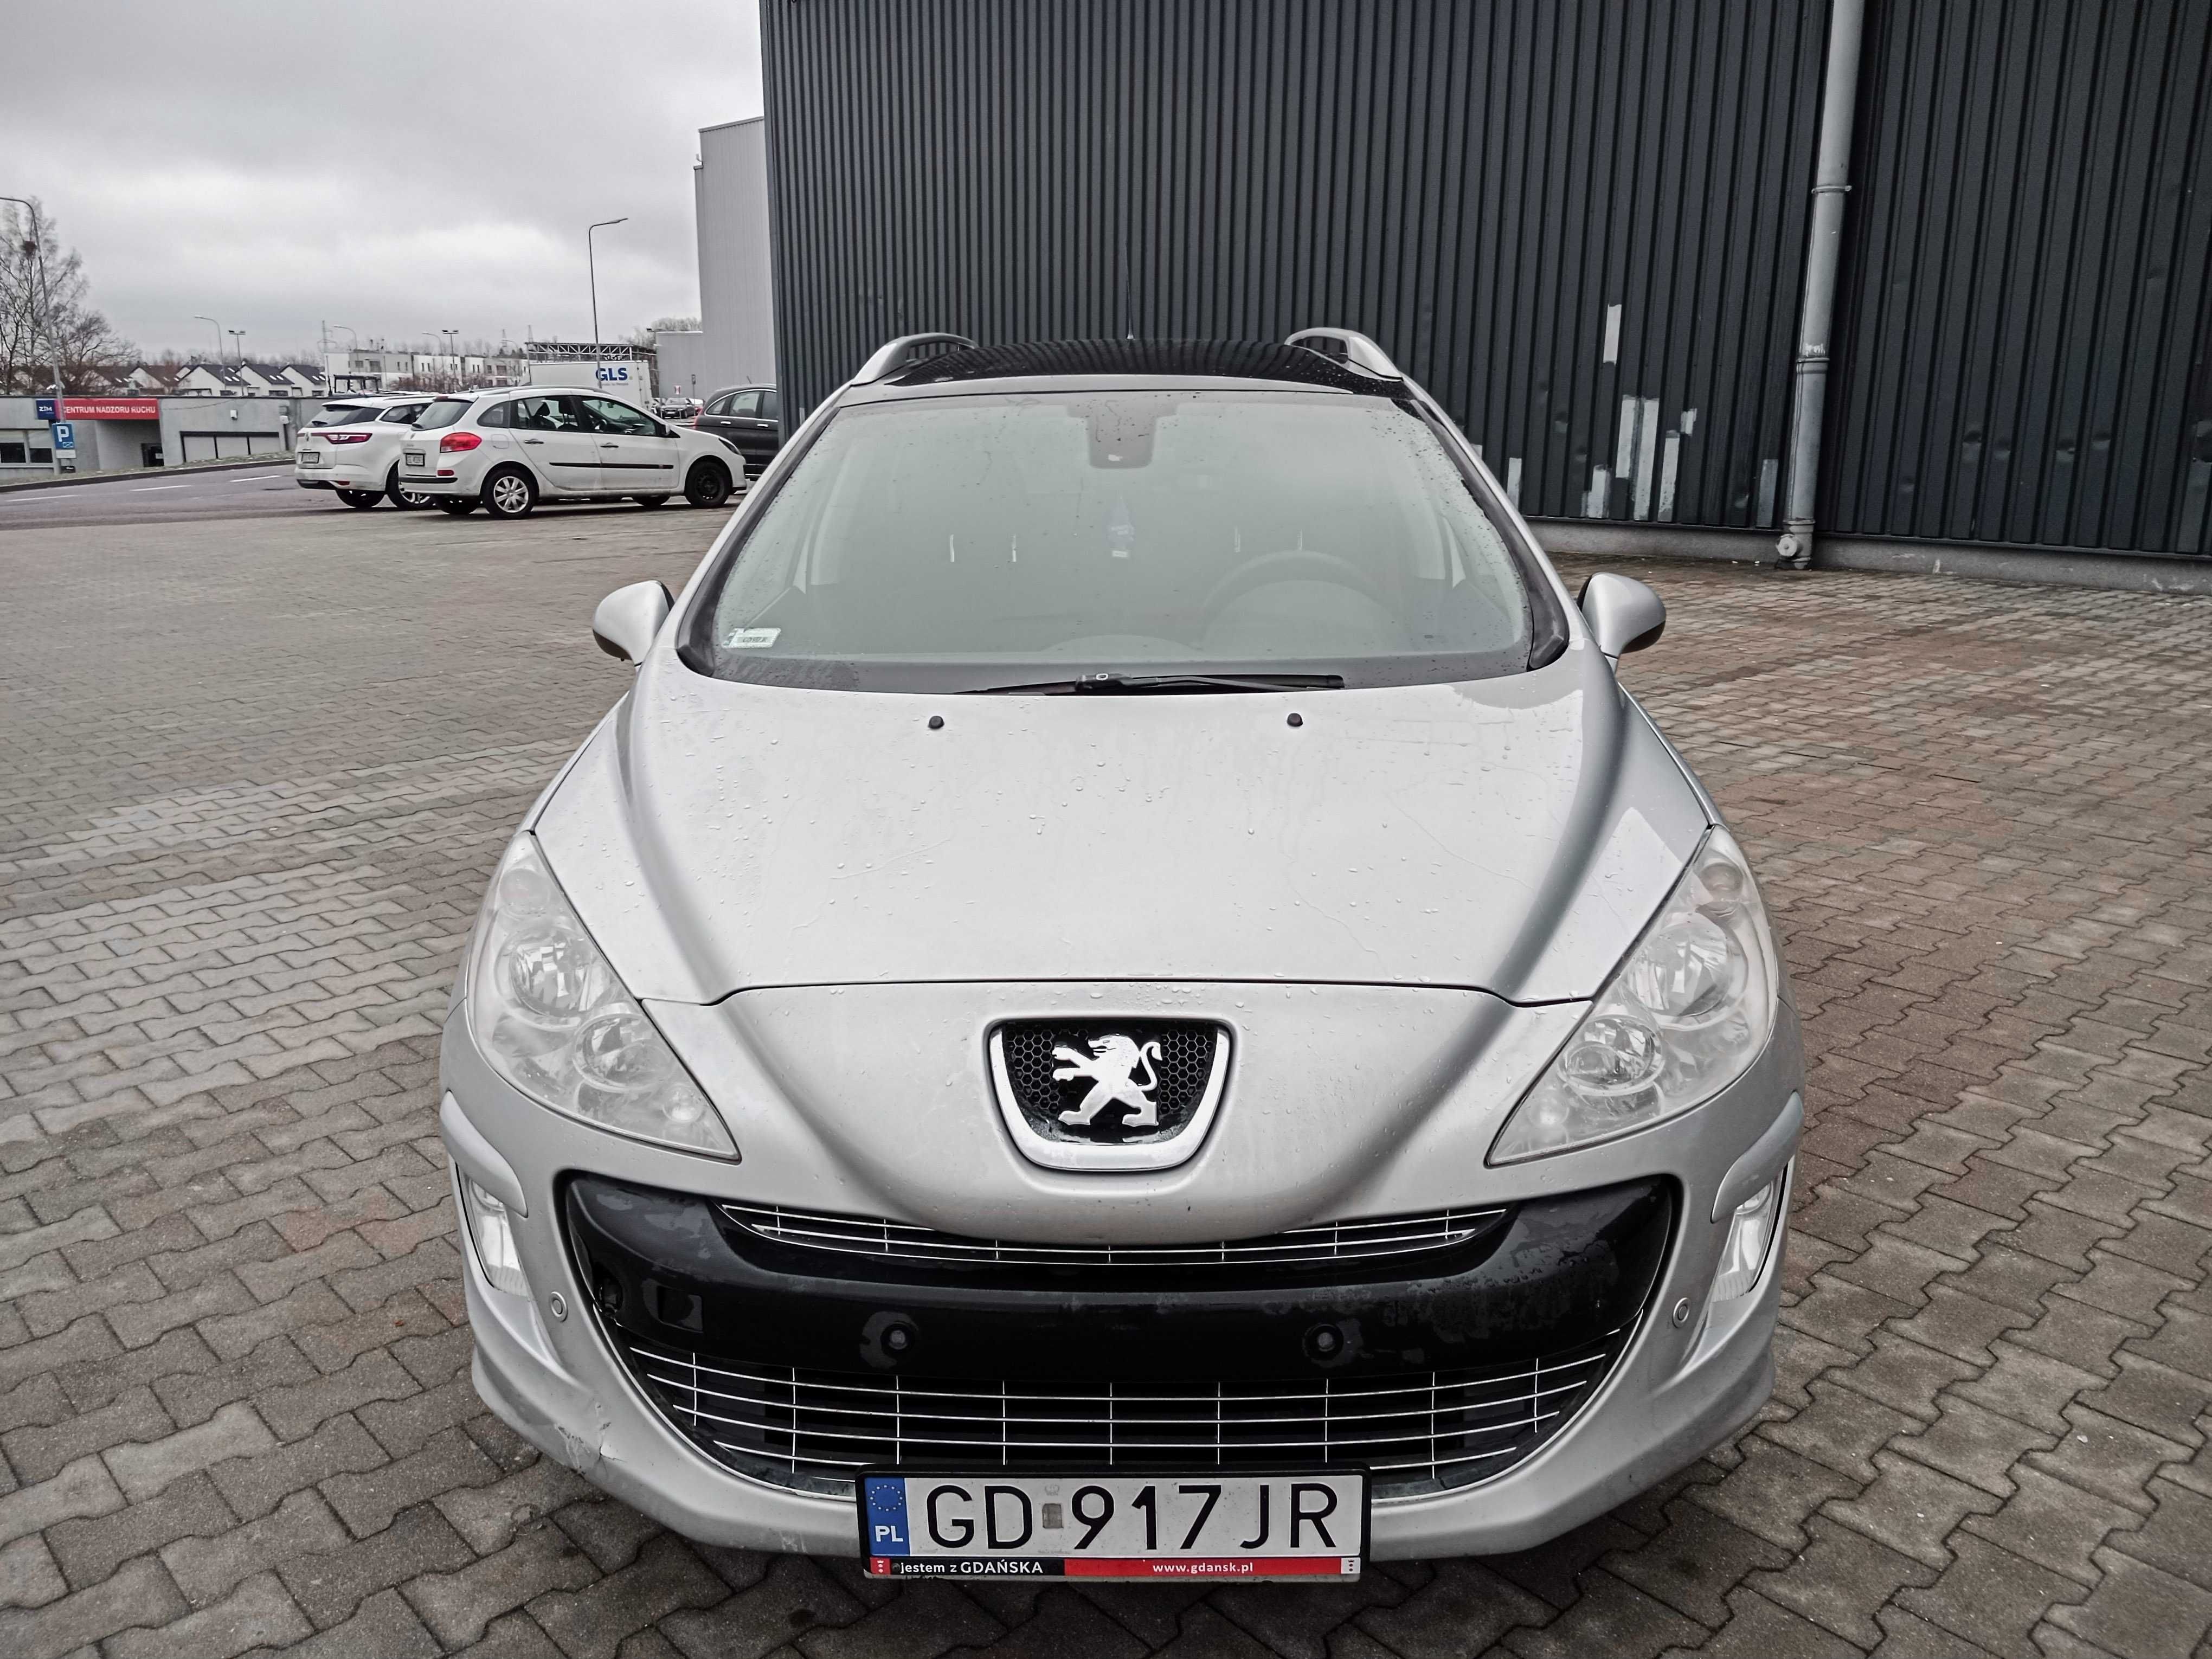 Peugeot 308 1.6 HDI, panoramiczny dach